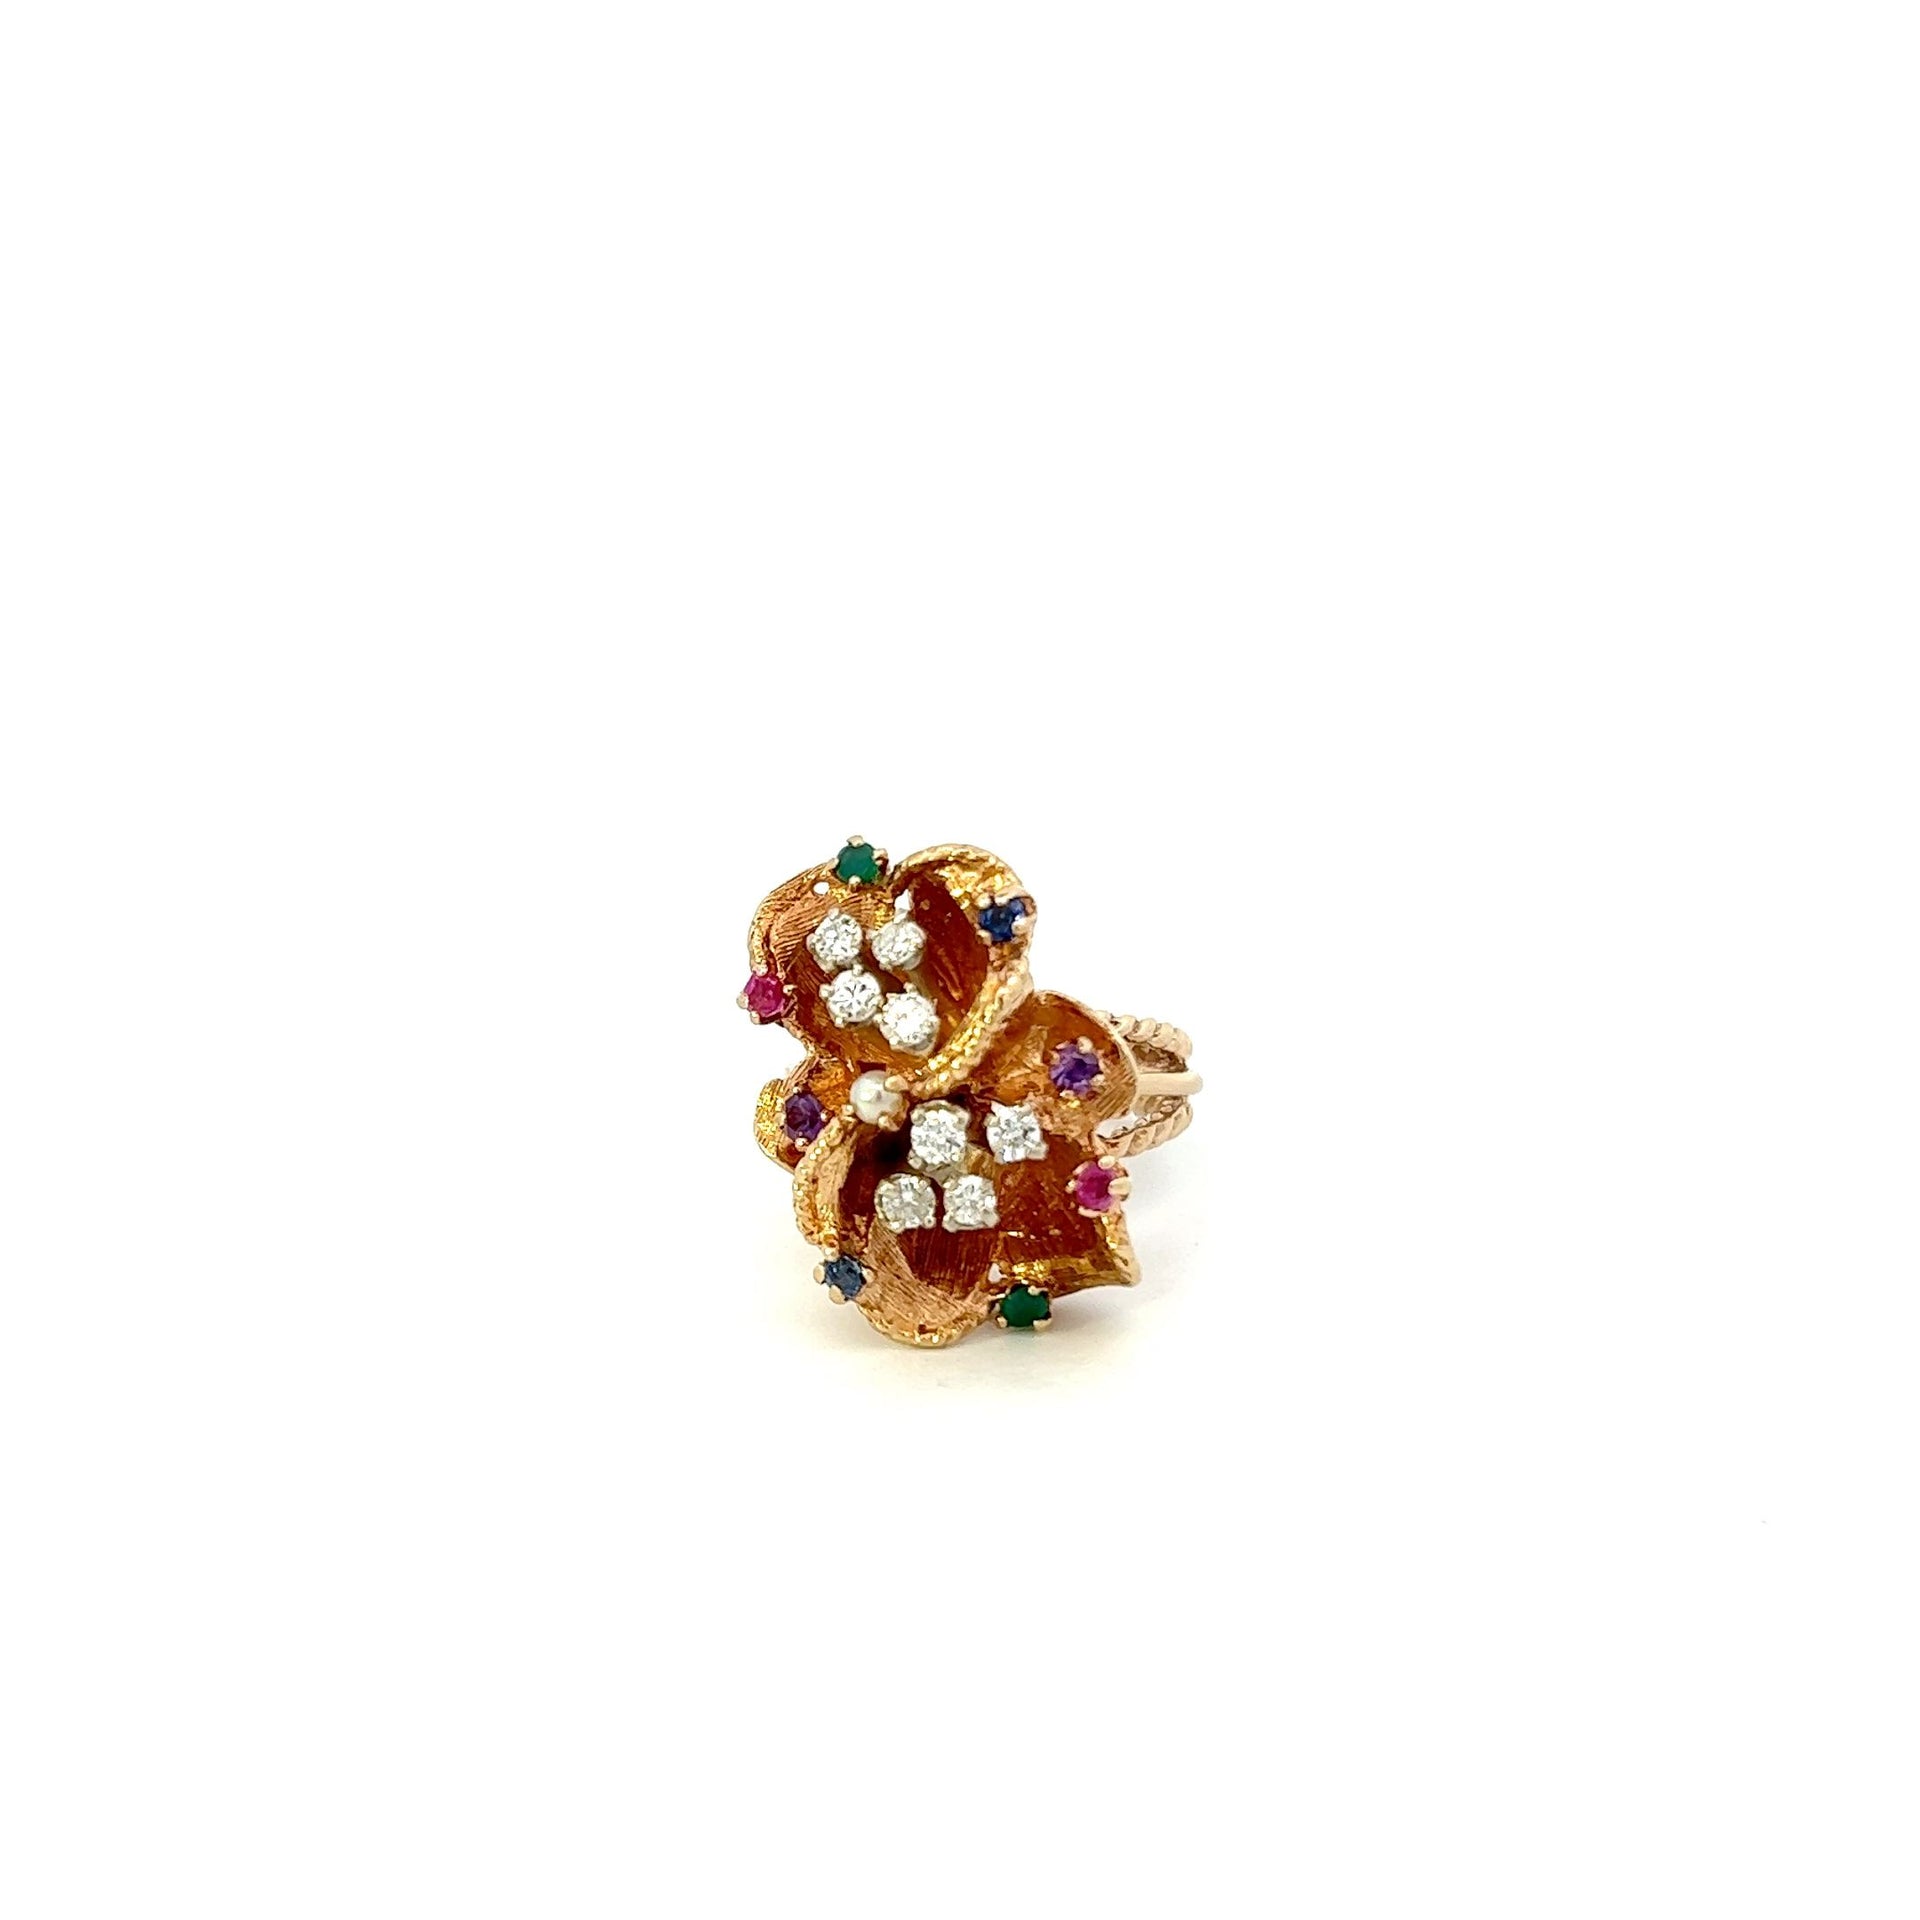 ESTATE 14KT YELLOW GOLD RETRO ERA FLORAL CLUSTER FLOATING DIAMOND AND MULTI COLOR GEM STONES RING.